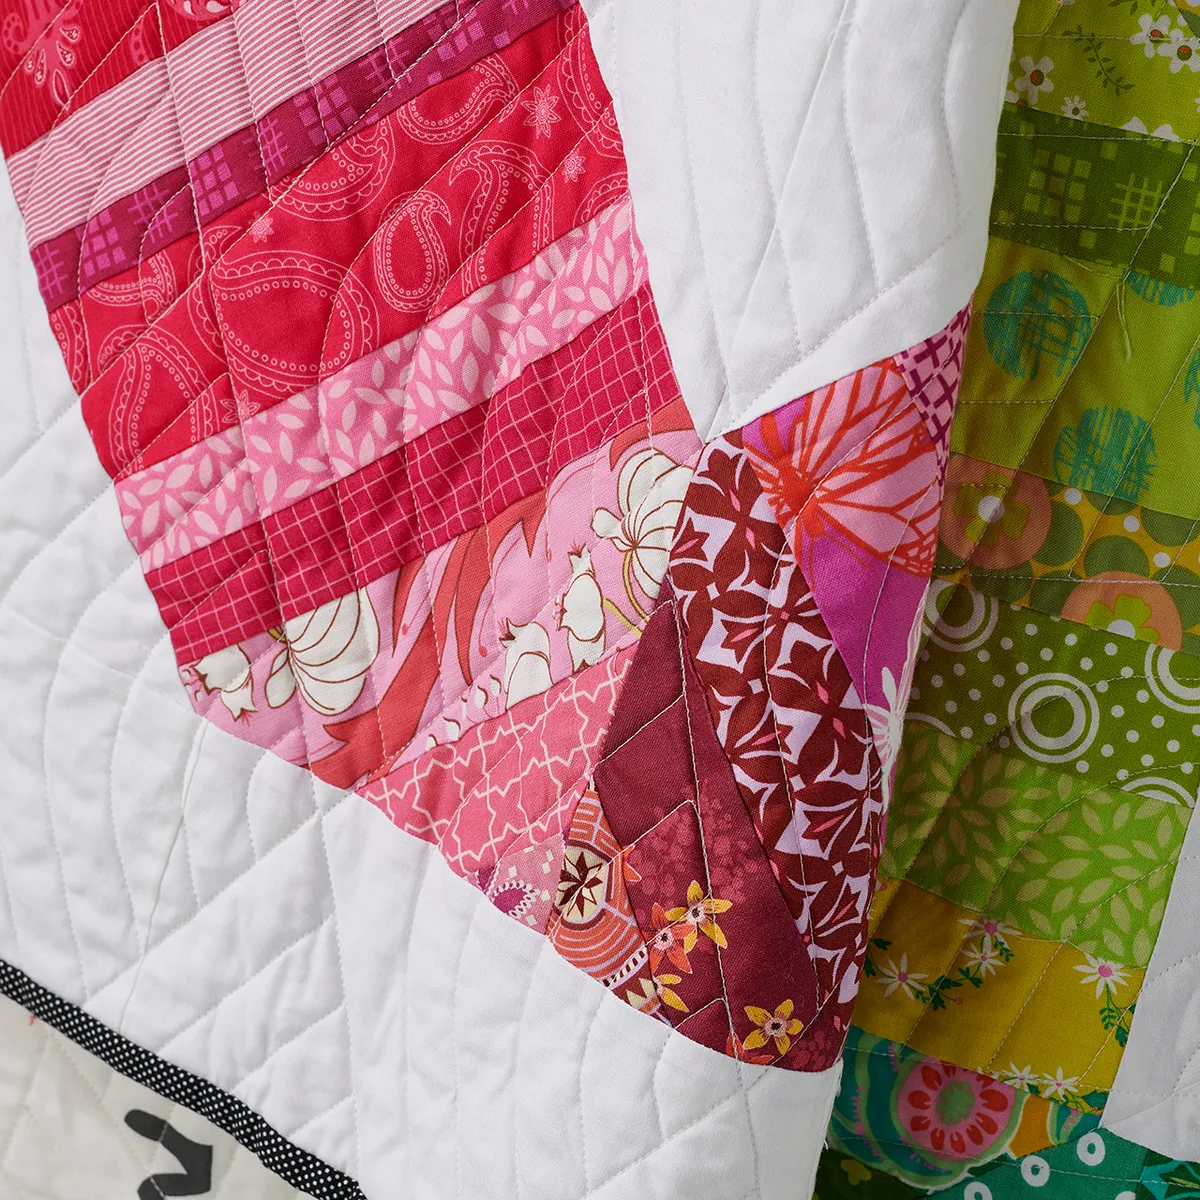 How to get better results from machine quilting